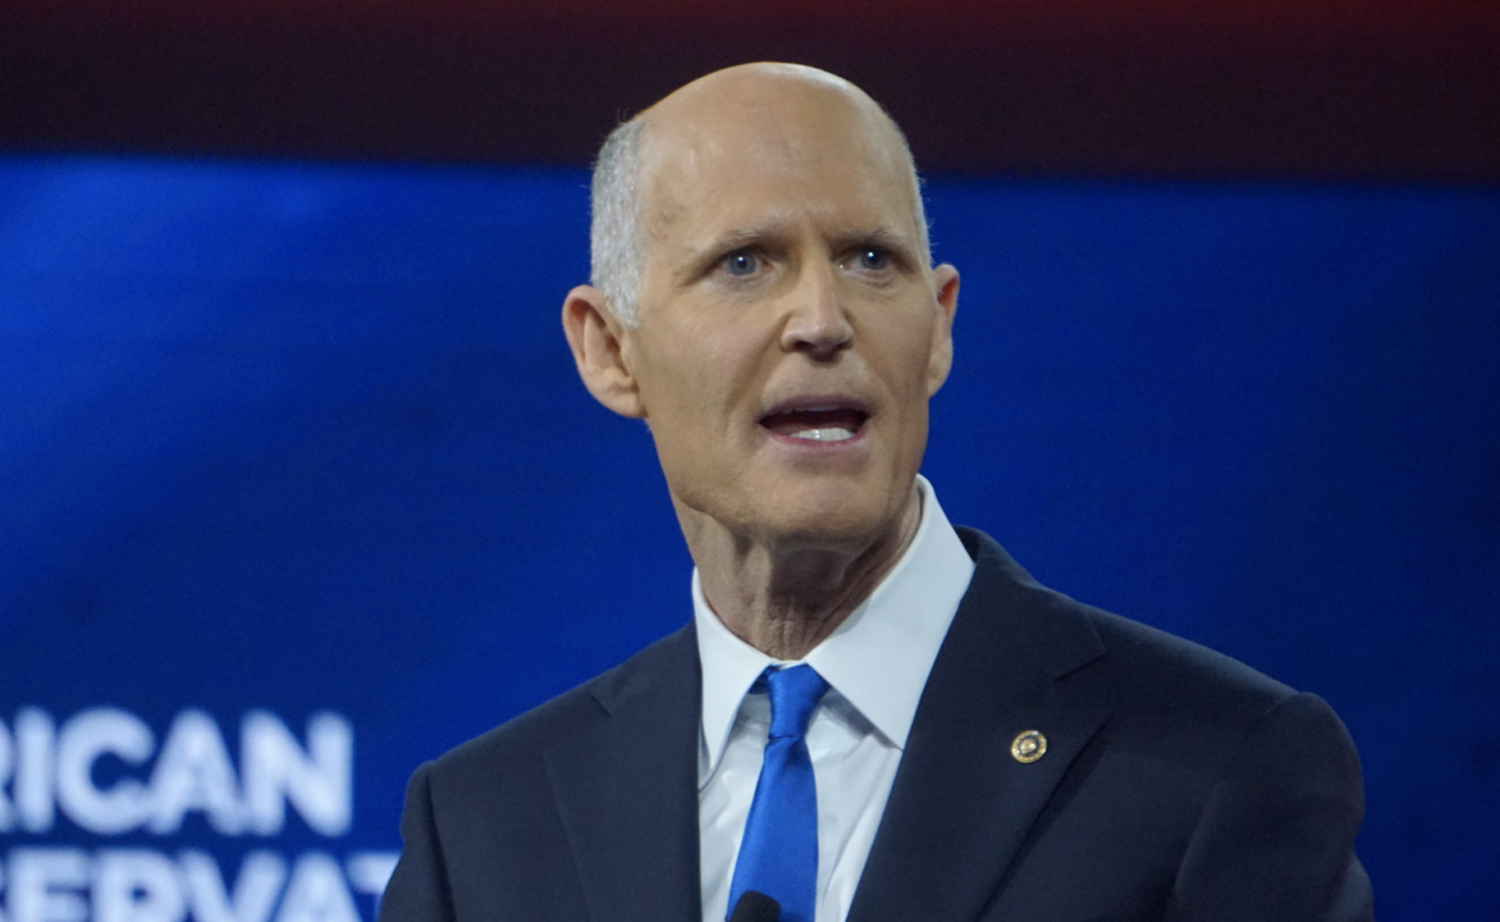 Rick Scott Introduces the 'Let's Get to Work Act'; Embodies Former Campaign Slogan